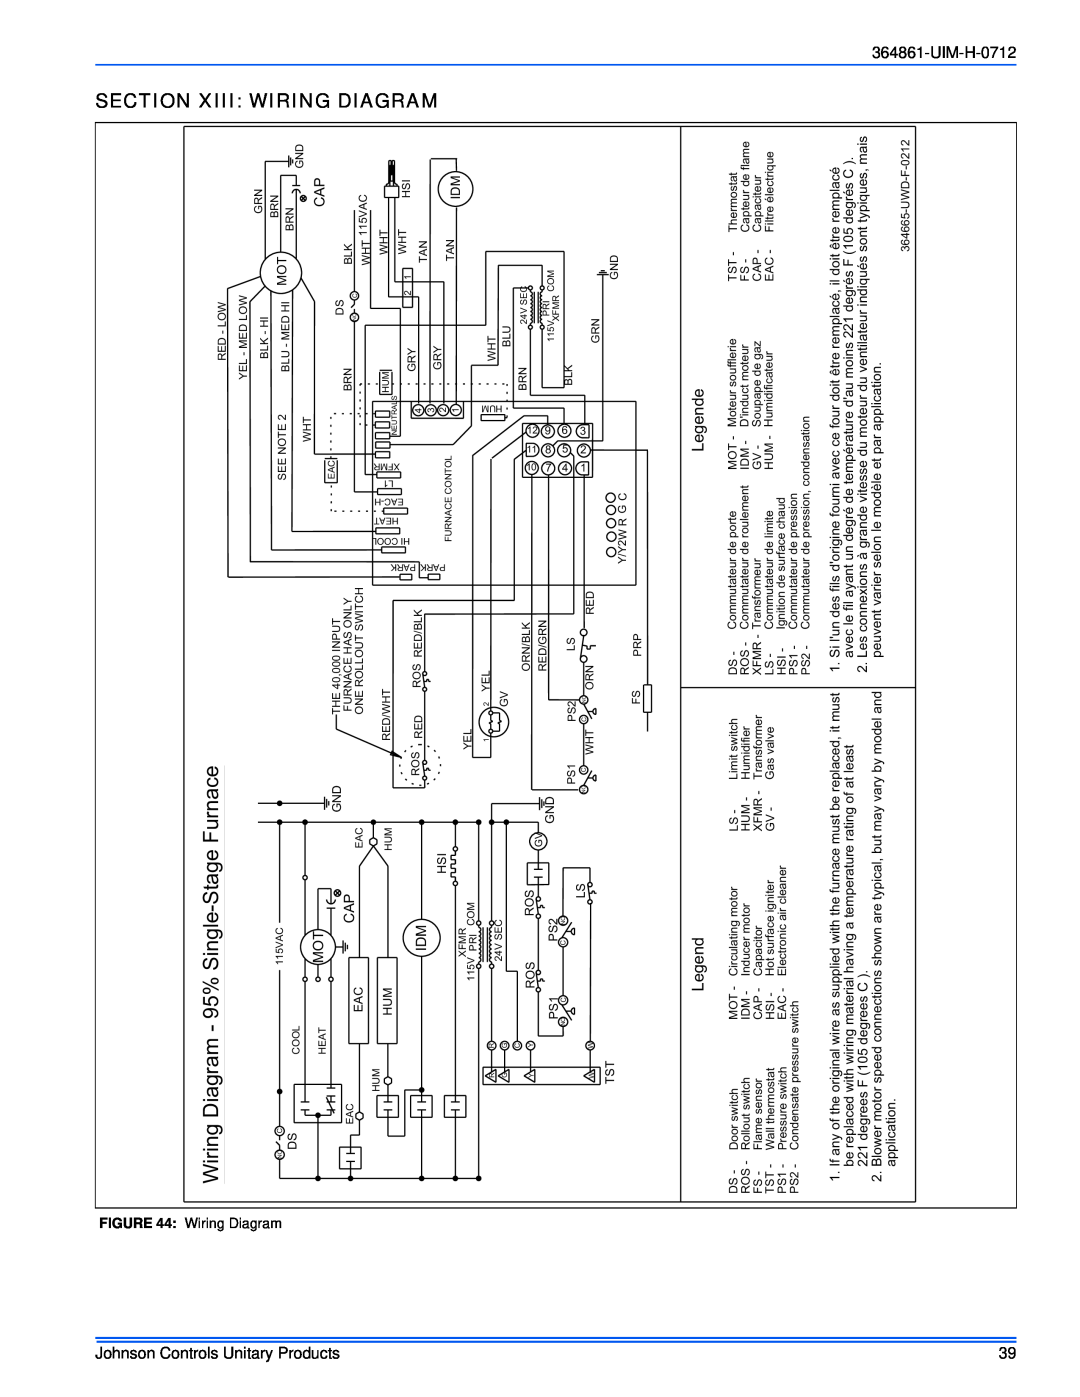 Johnson Controls GG9S'MP Wiring Diagram - 95% Single-StageFurnace, Section Xiii Wiring, Johnson Controls Unitary Products 